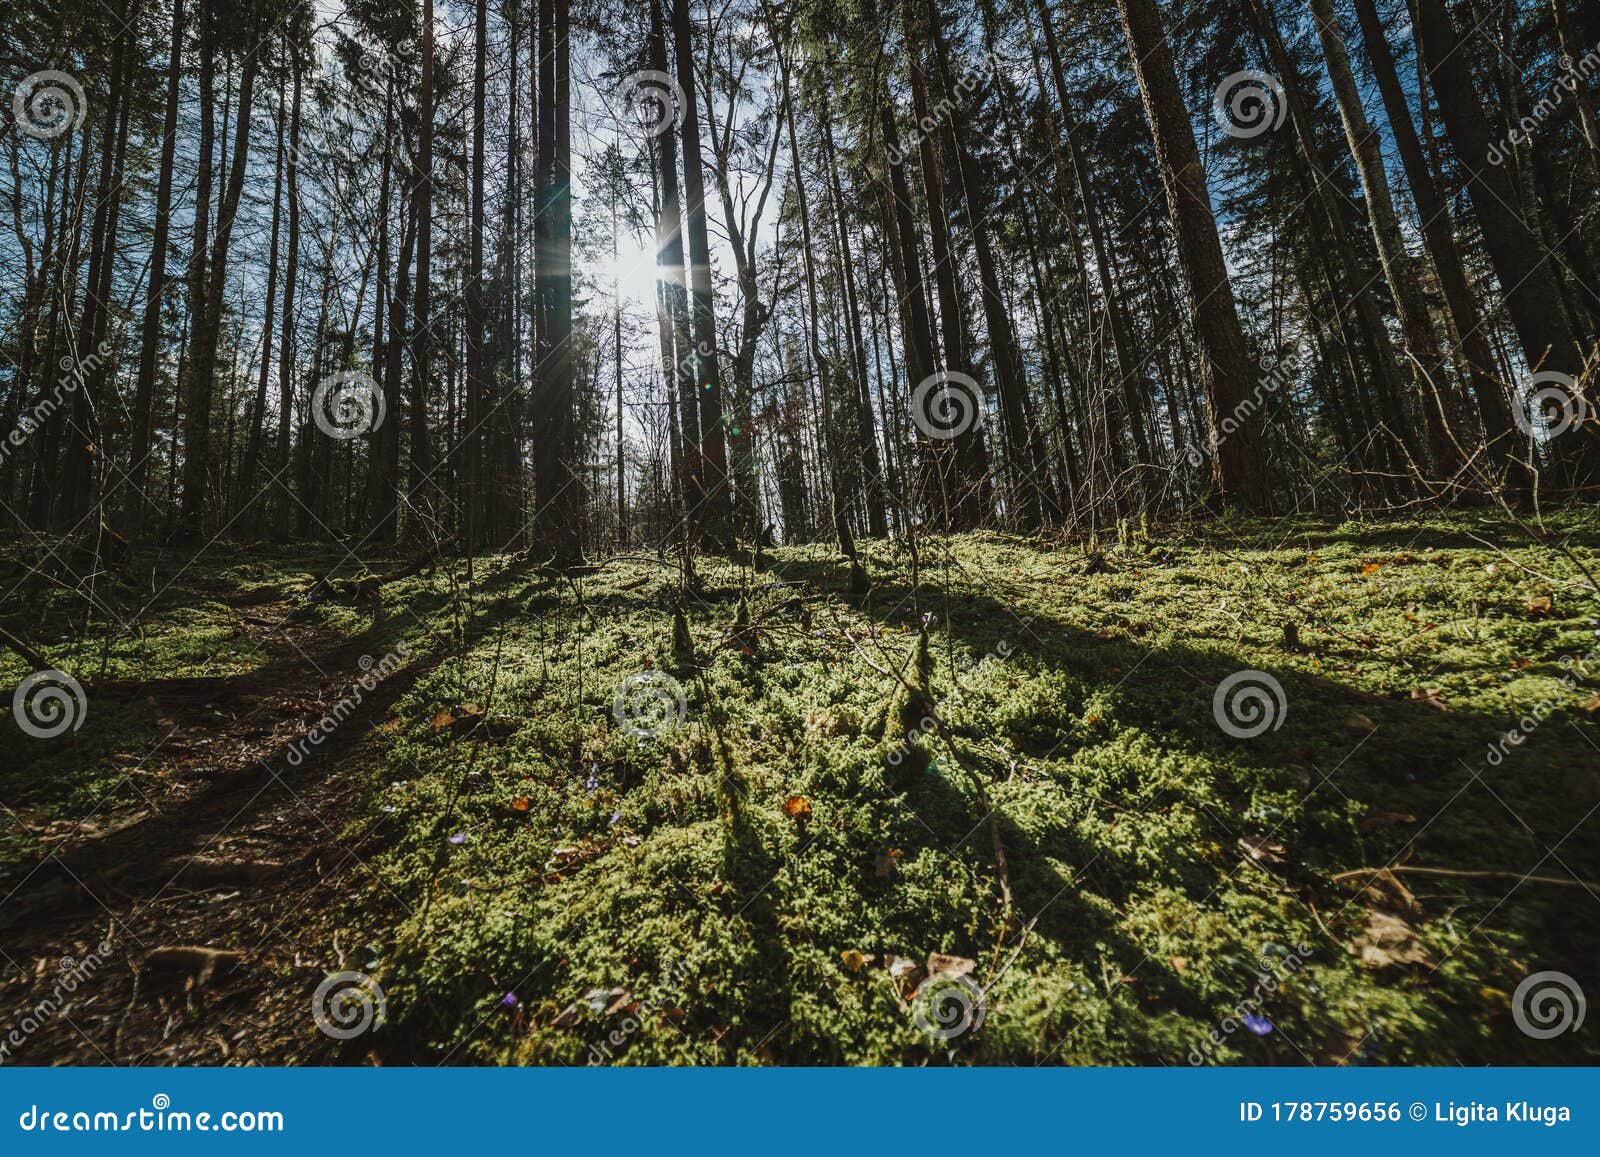 Sunshine Forest Trees Peaceful Outdoor Scene Wild Woods Nature Sun Through Green Forest Nature Peaceful Outdoor Stock Photo Image Of Leaf Outdoor